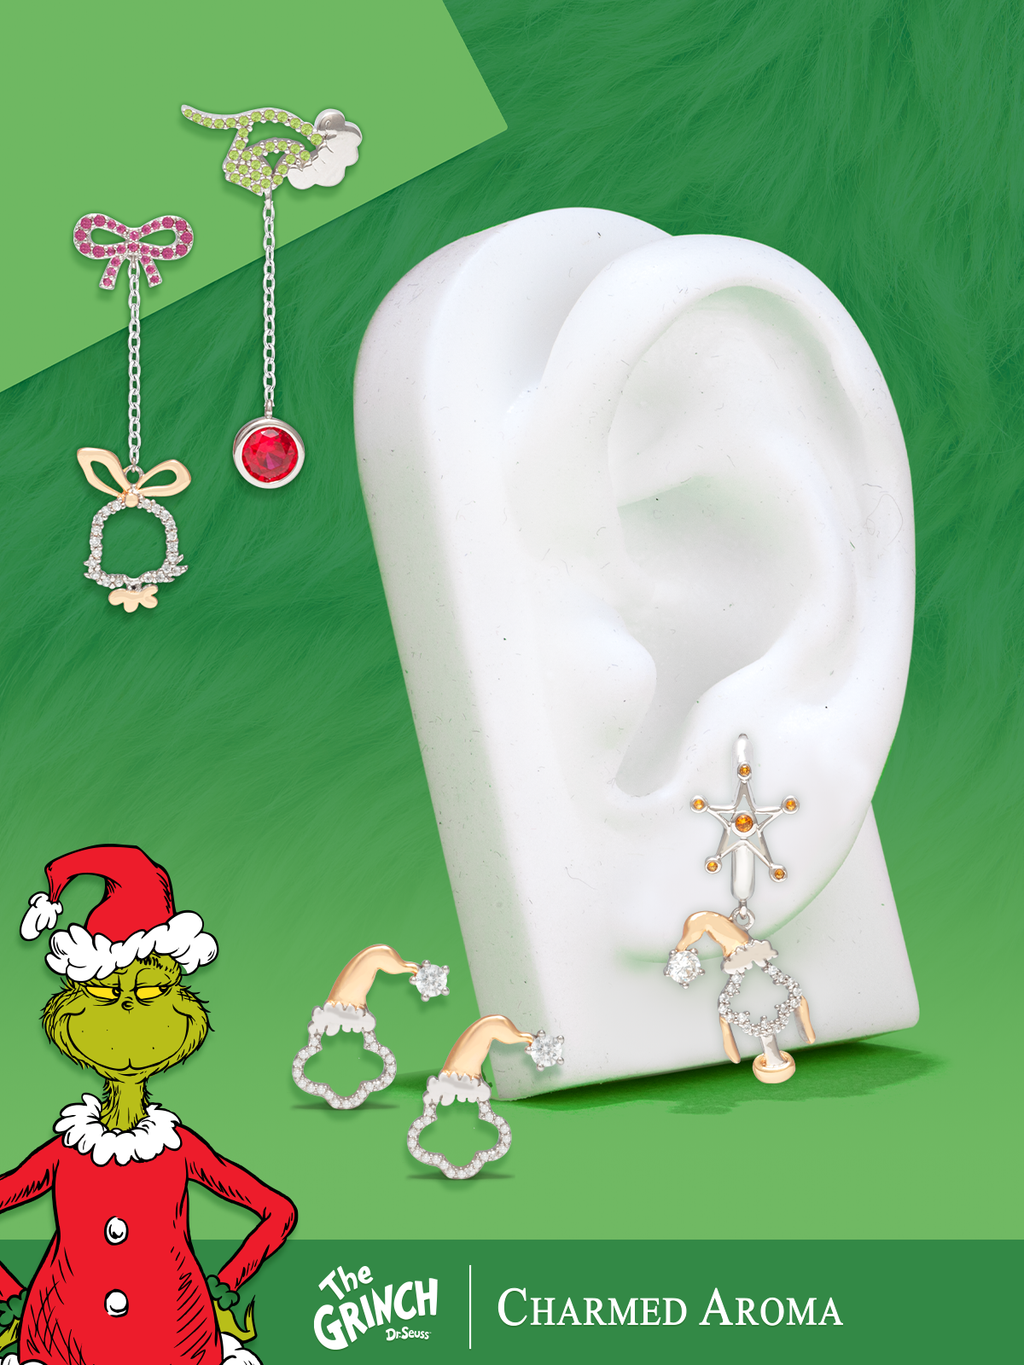 Dr Seuss. The Grinch™ Mug Candle - Grinch Earring Collection